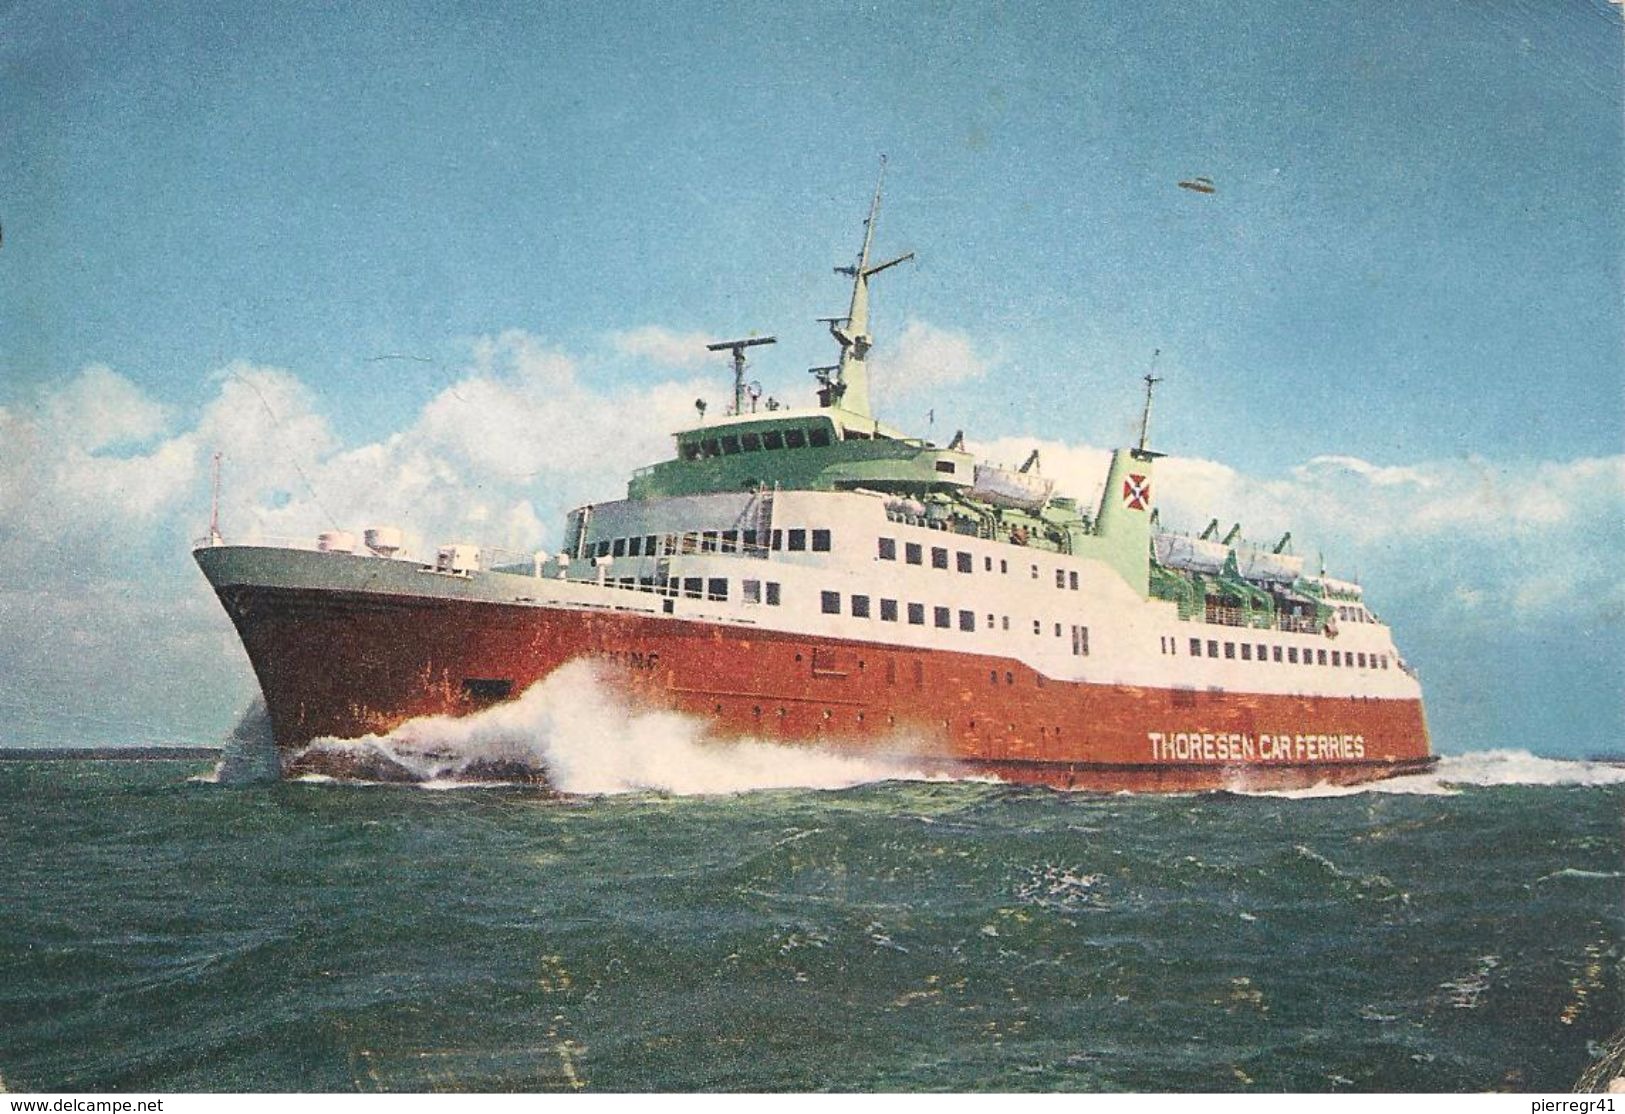 CPA-197-FERRY-CIE THORESEN CAR FERRIES-VIKING-SOUTHAMPTON-LE HAVRE-CHERBOURG-TBE - Ferries